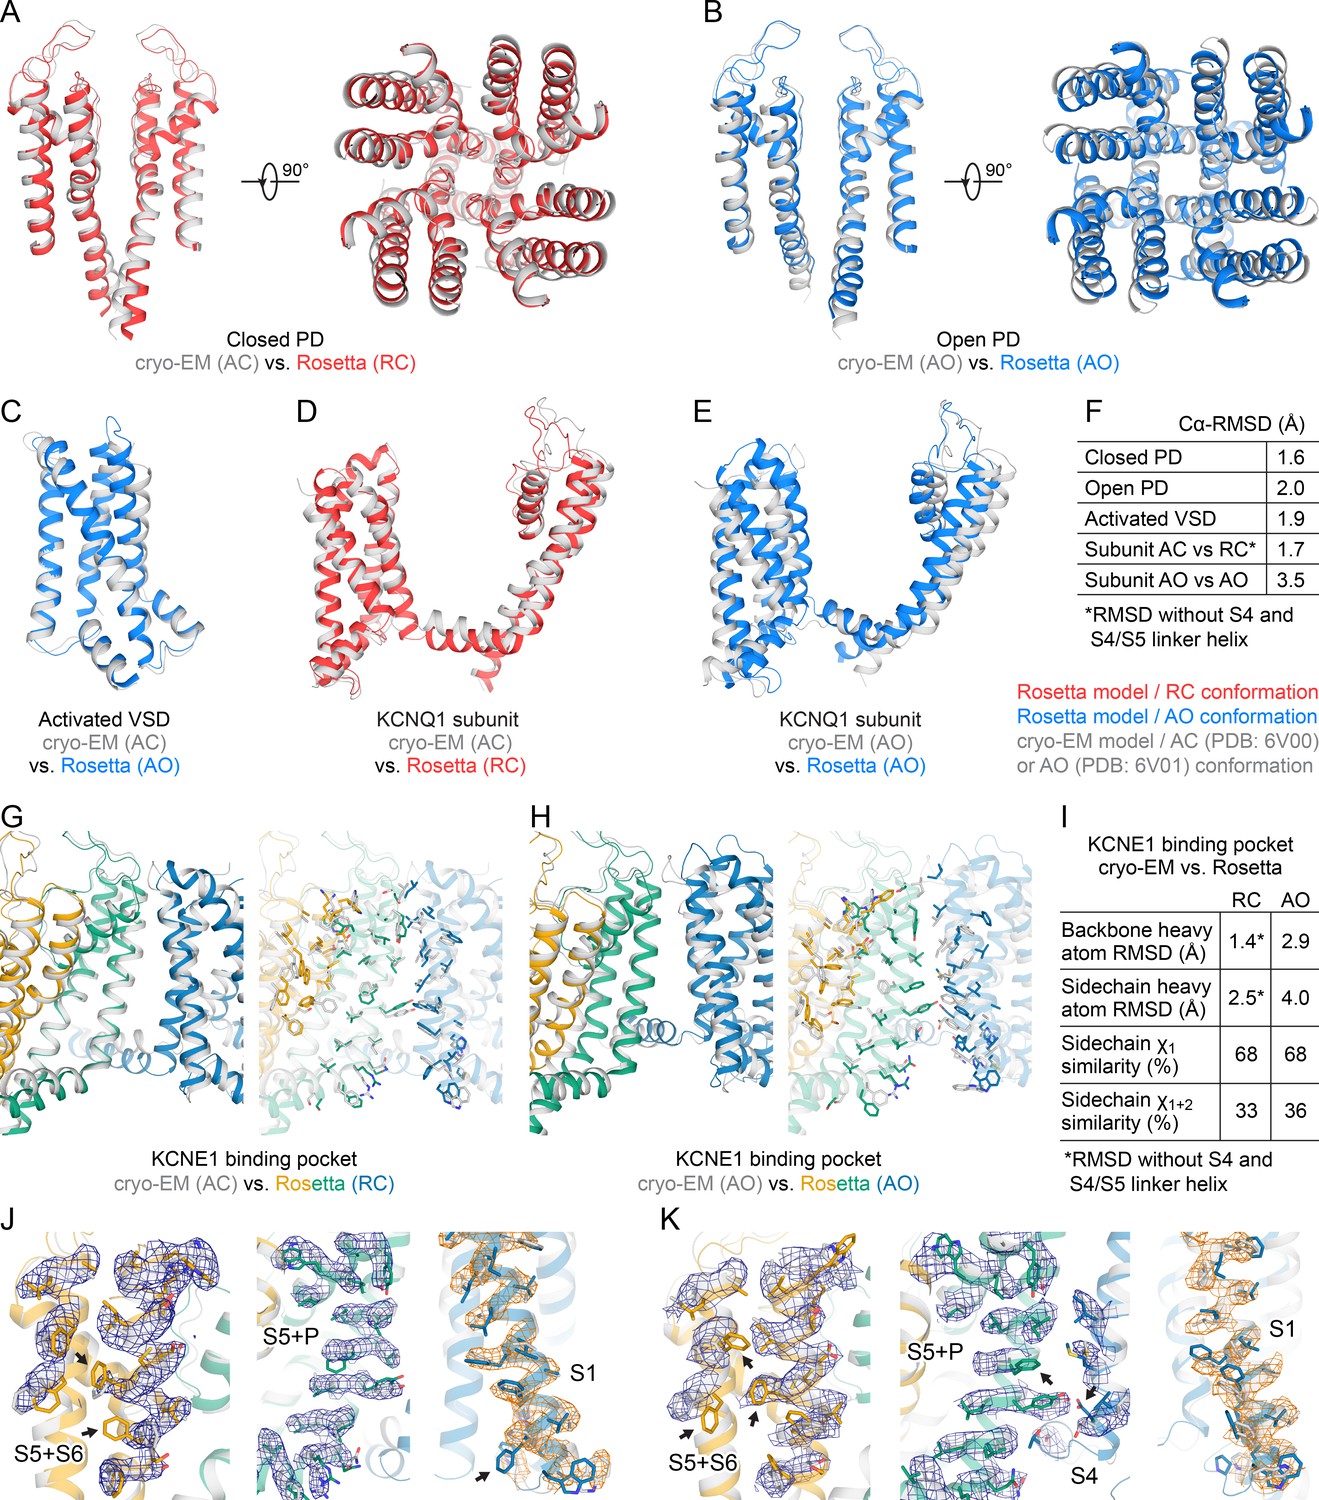 Allosteric Mechanism For Kcne1 Modulation Of Kcnq1 Potassium Channel Activation Elife